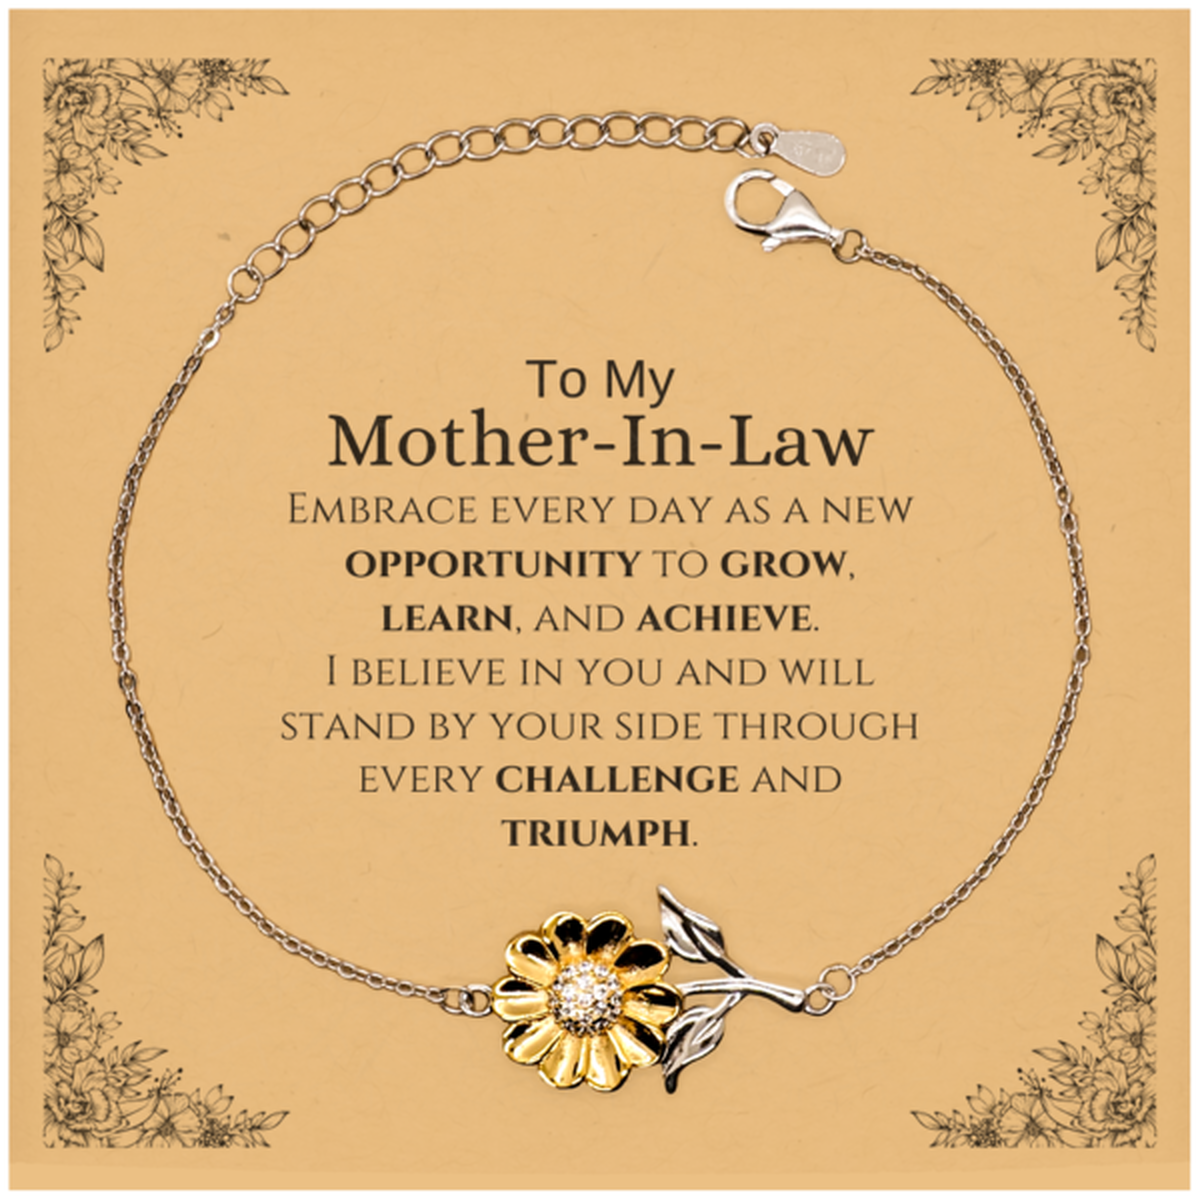 To My Mother-In-Law Gifts, I believe in you and will stand by your side, Inspirational Sunflower Bracelet For Mother-In-Law, Birthday Christmas Motivational Mother-In-Law Gifts